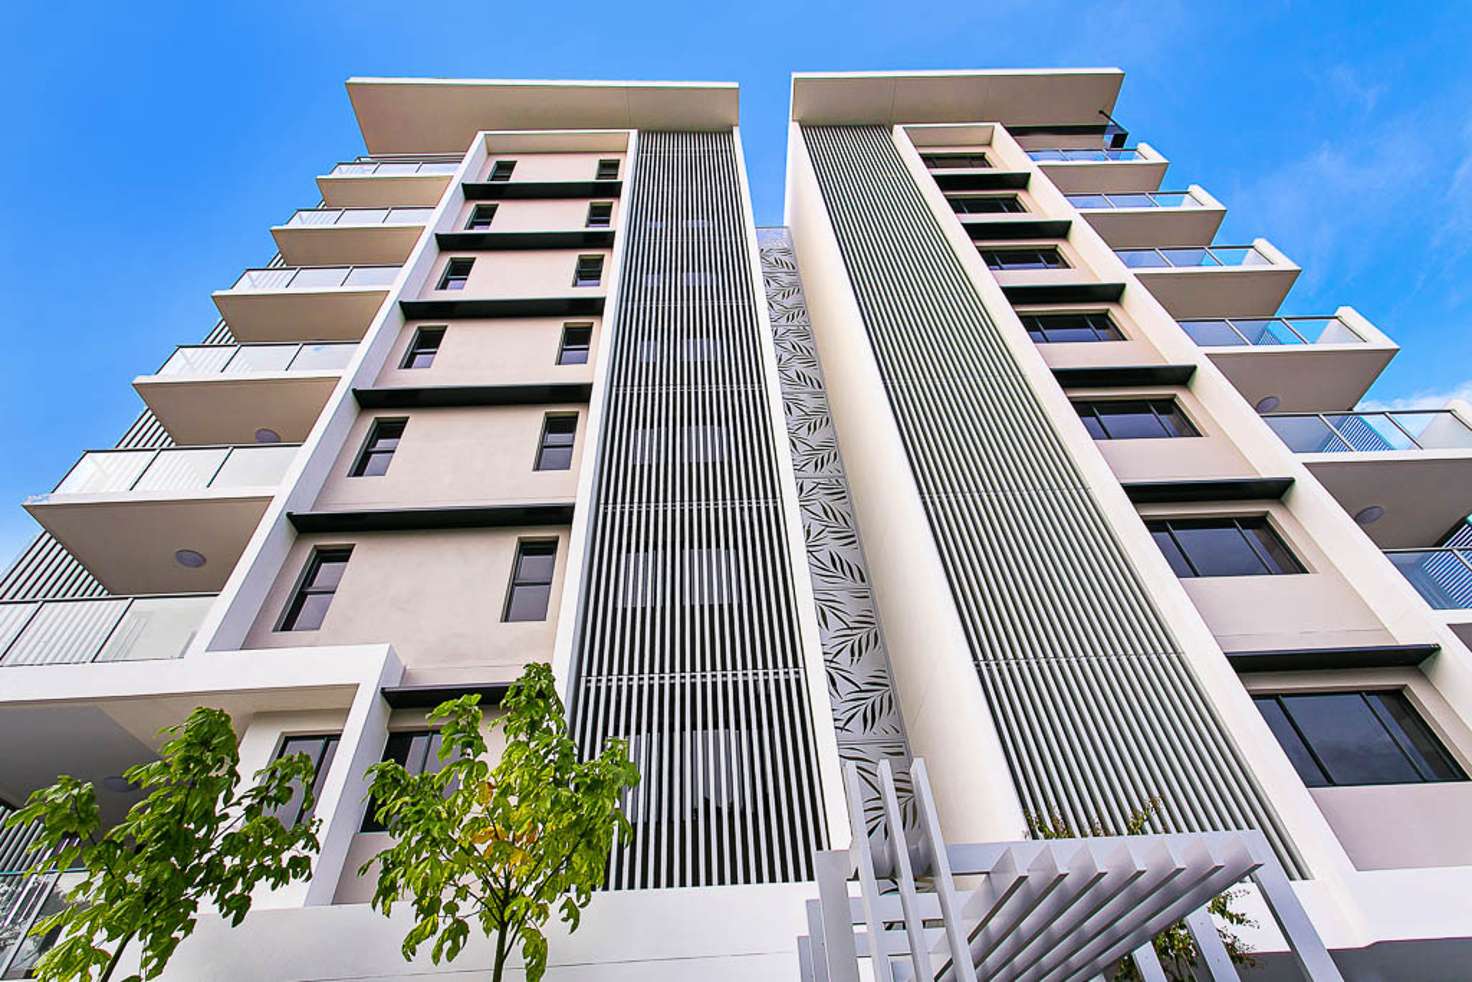 Main view of Homely apartment listing, 0002/11 Andrews St, Southport QLD 4215